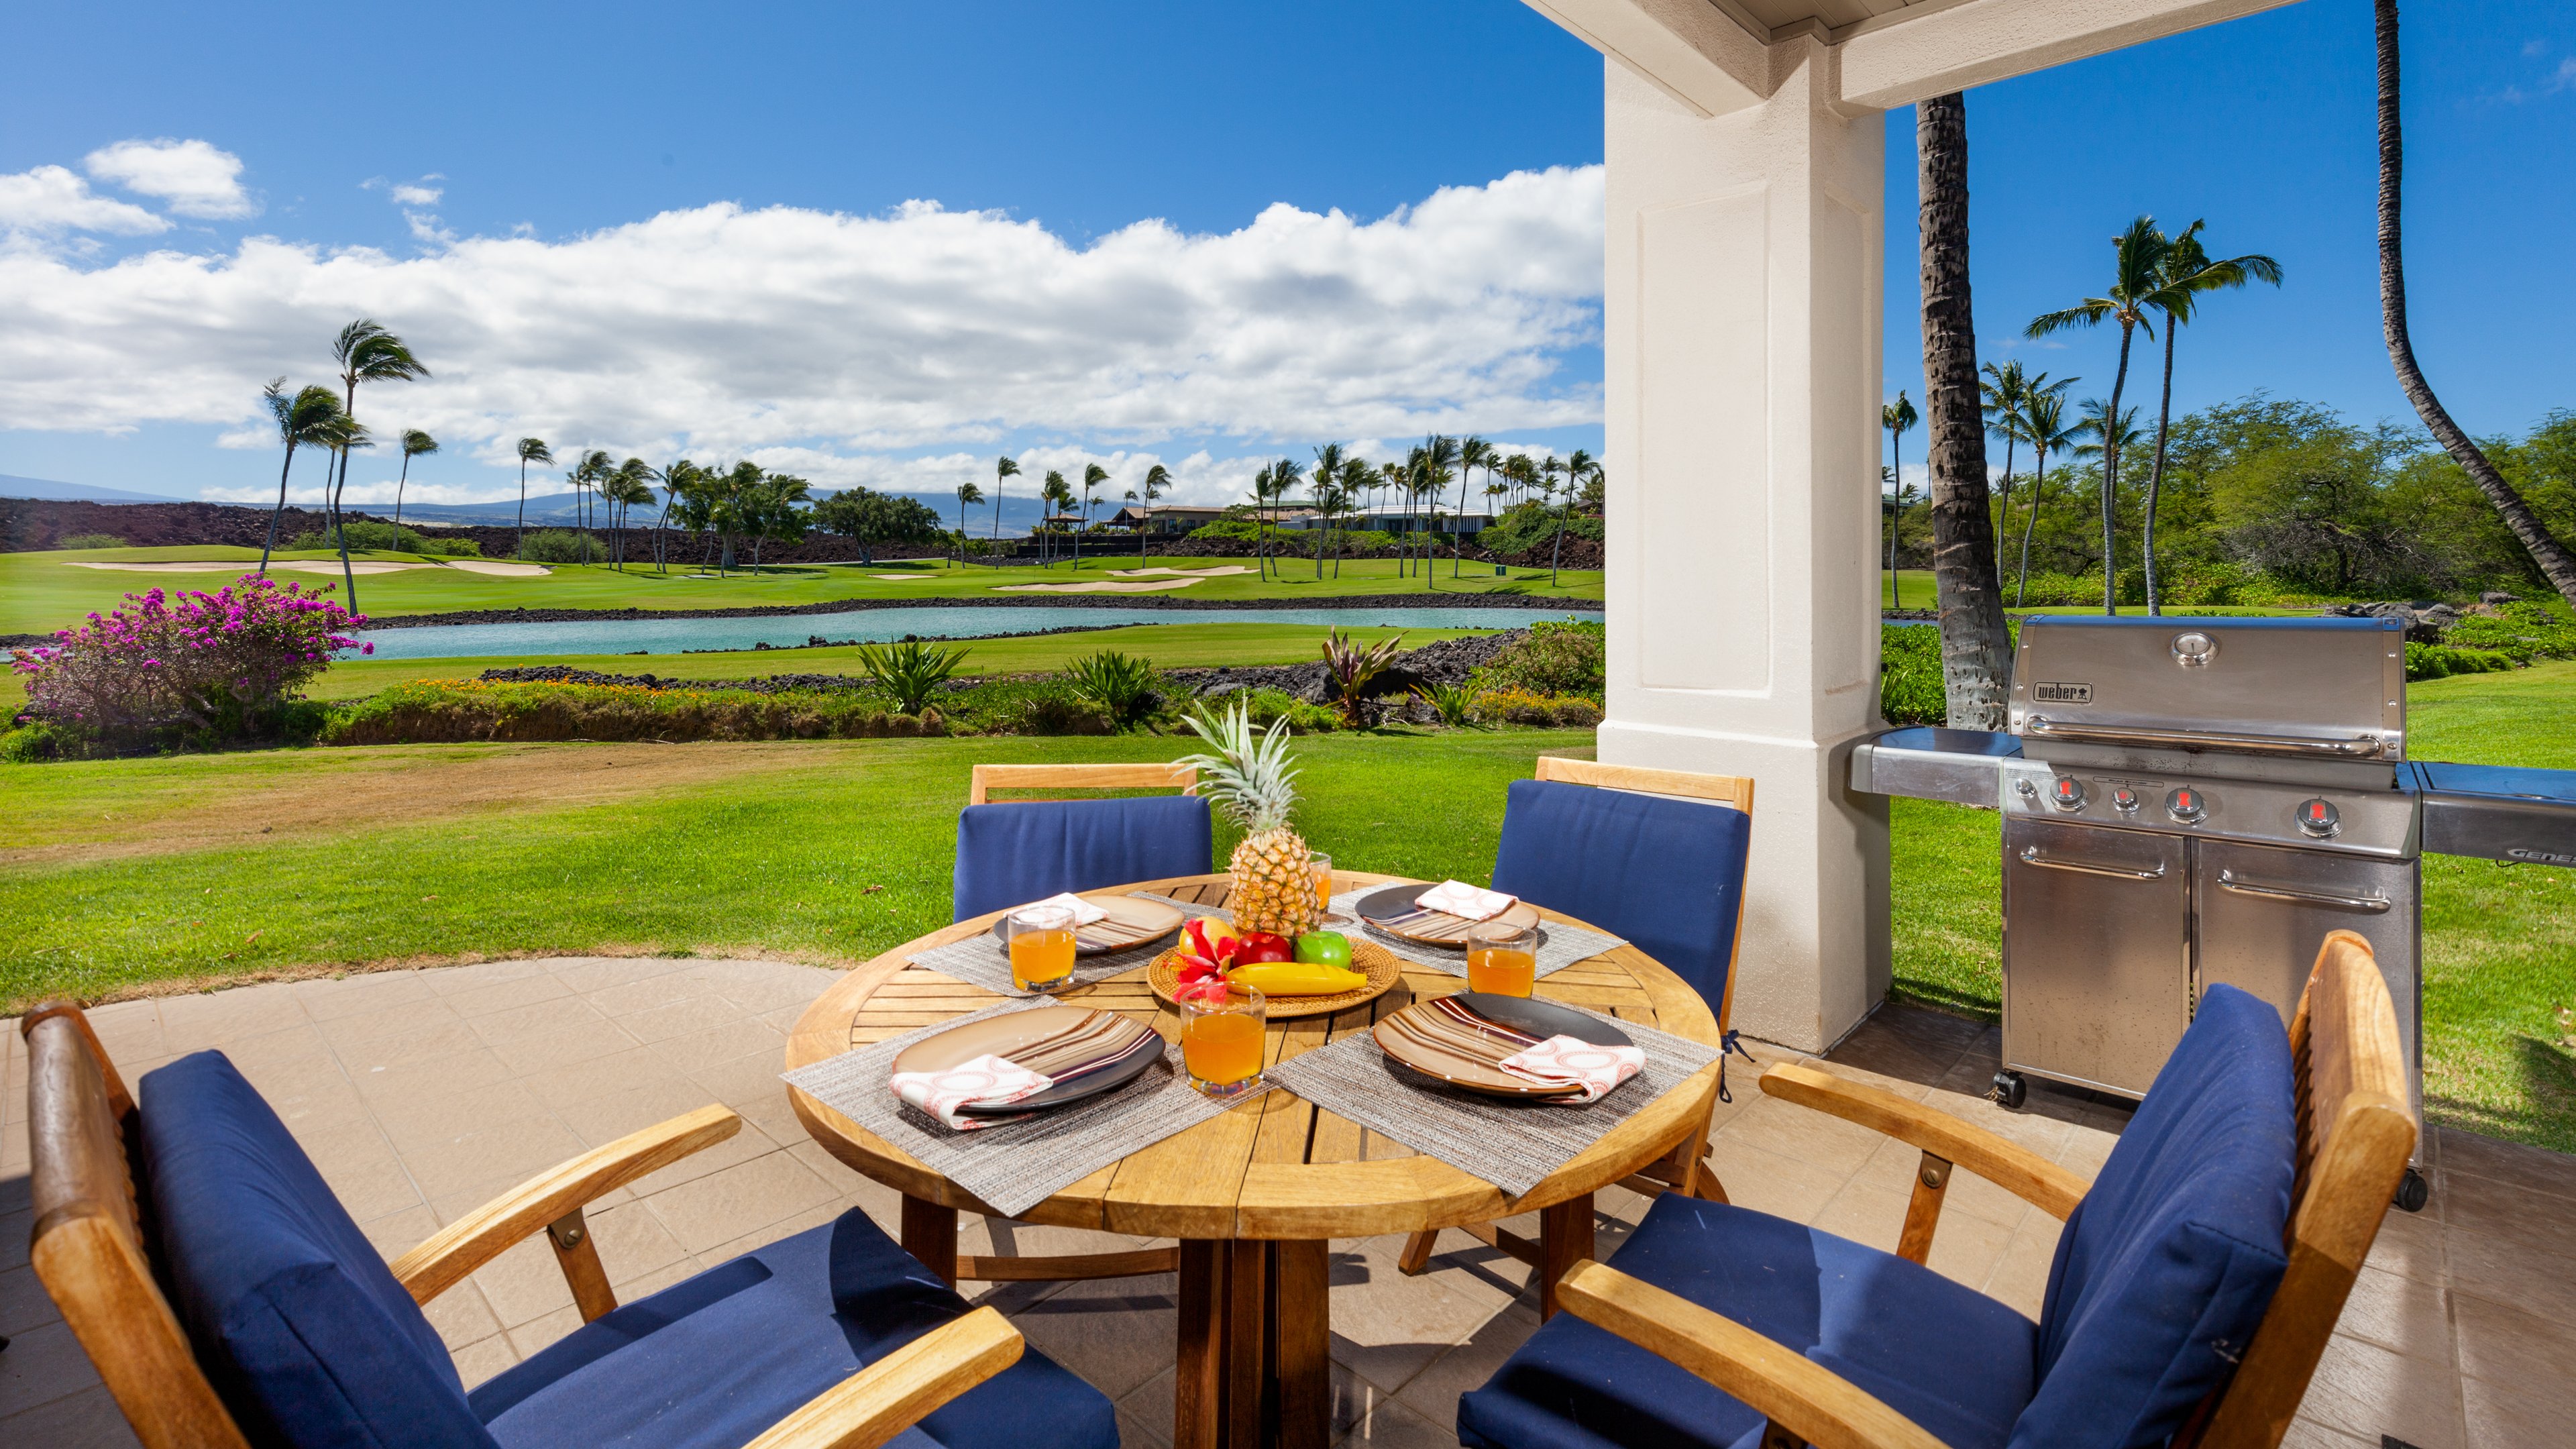 Welcome to Island Melody in the Islands Community in Mauna Lani. 
Enjoy a nice meal on Lanai grilled on the high-end Weber Grill.